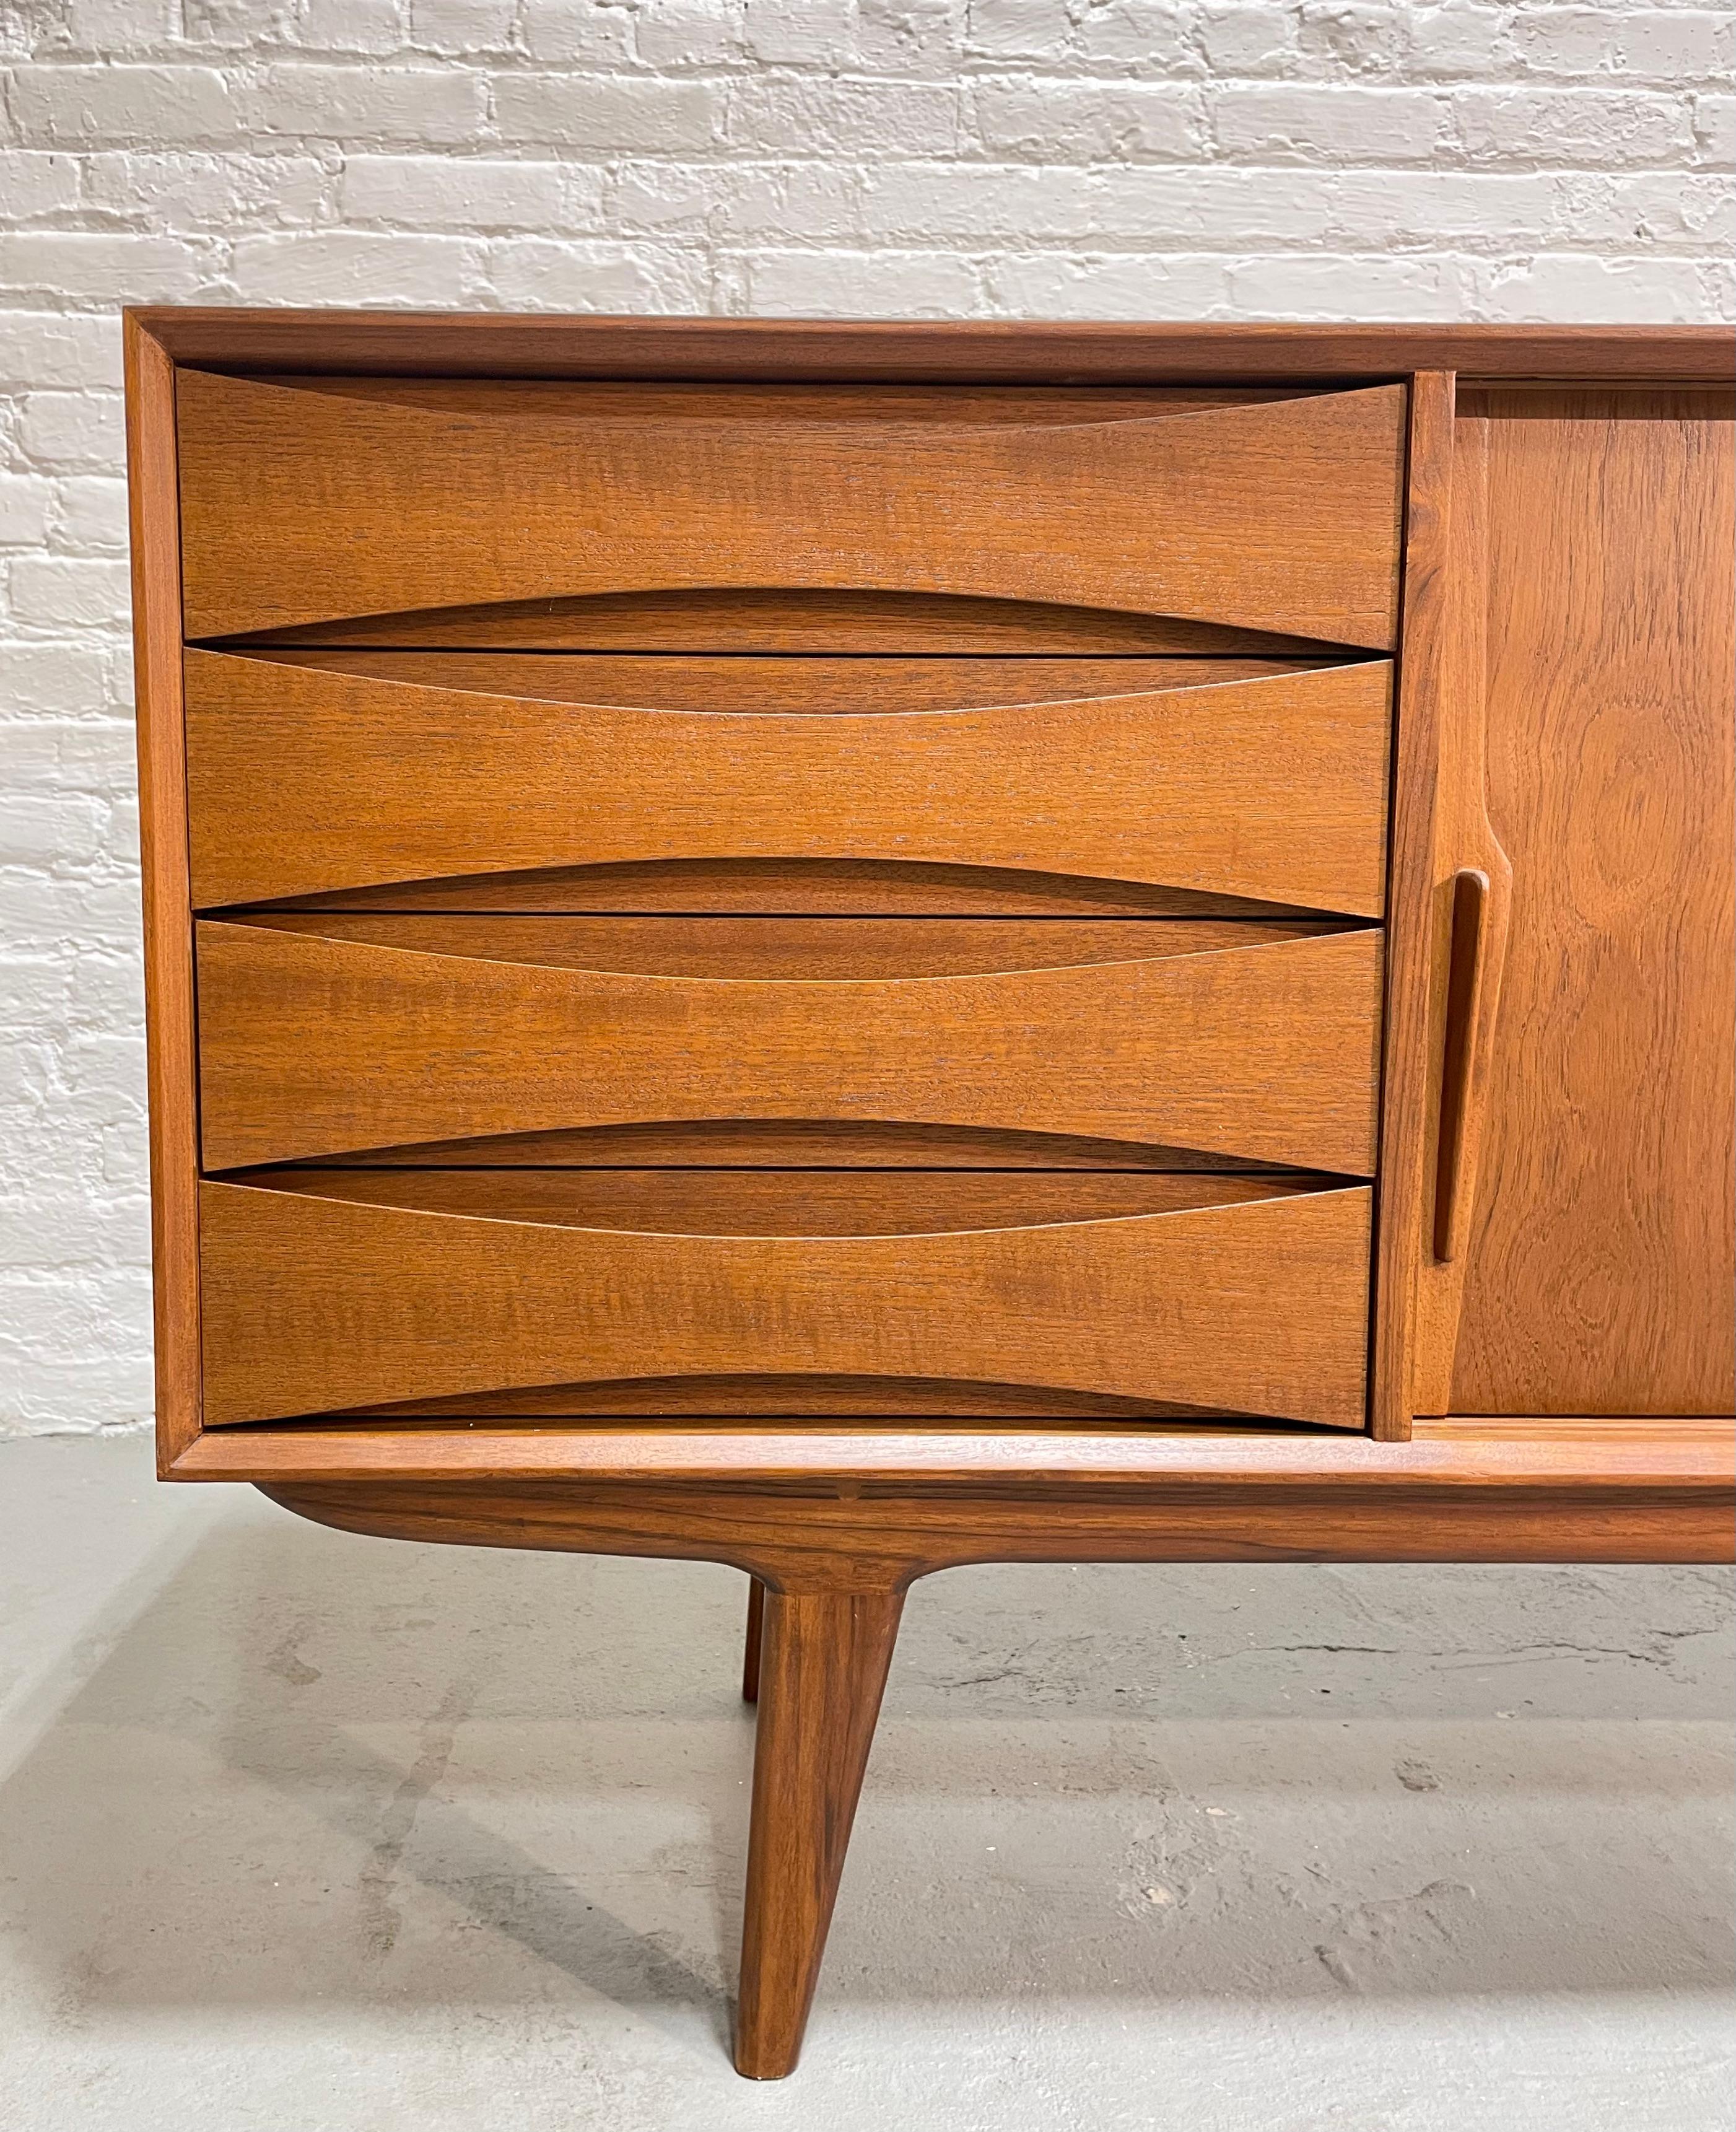 Contemporary  Handsome Mid Century MODERN styled SIDEBOARD / CREDENZA media stand